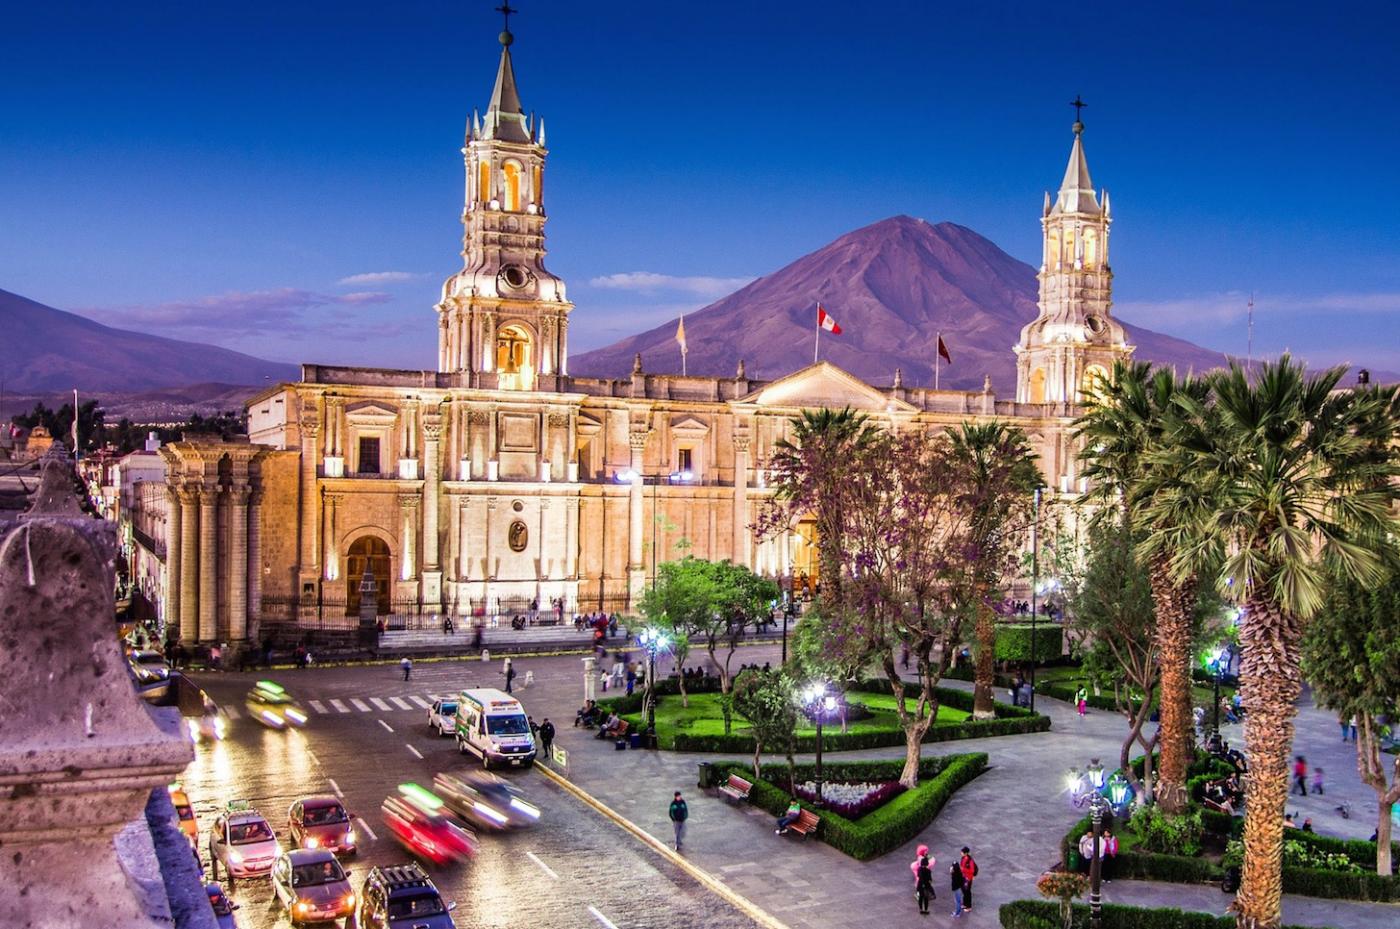 An Introduction to Arequipa